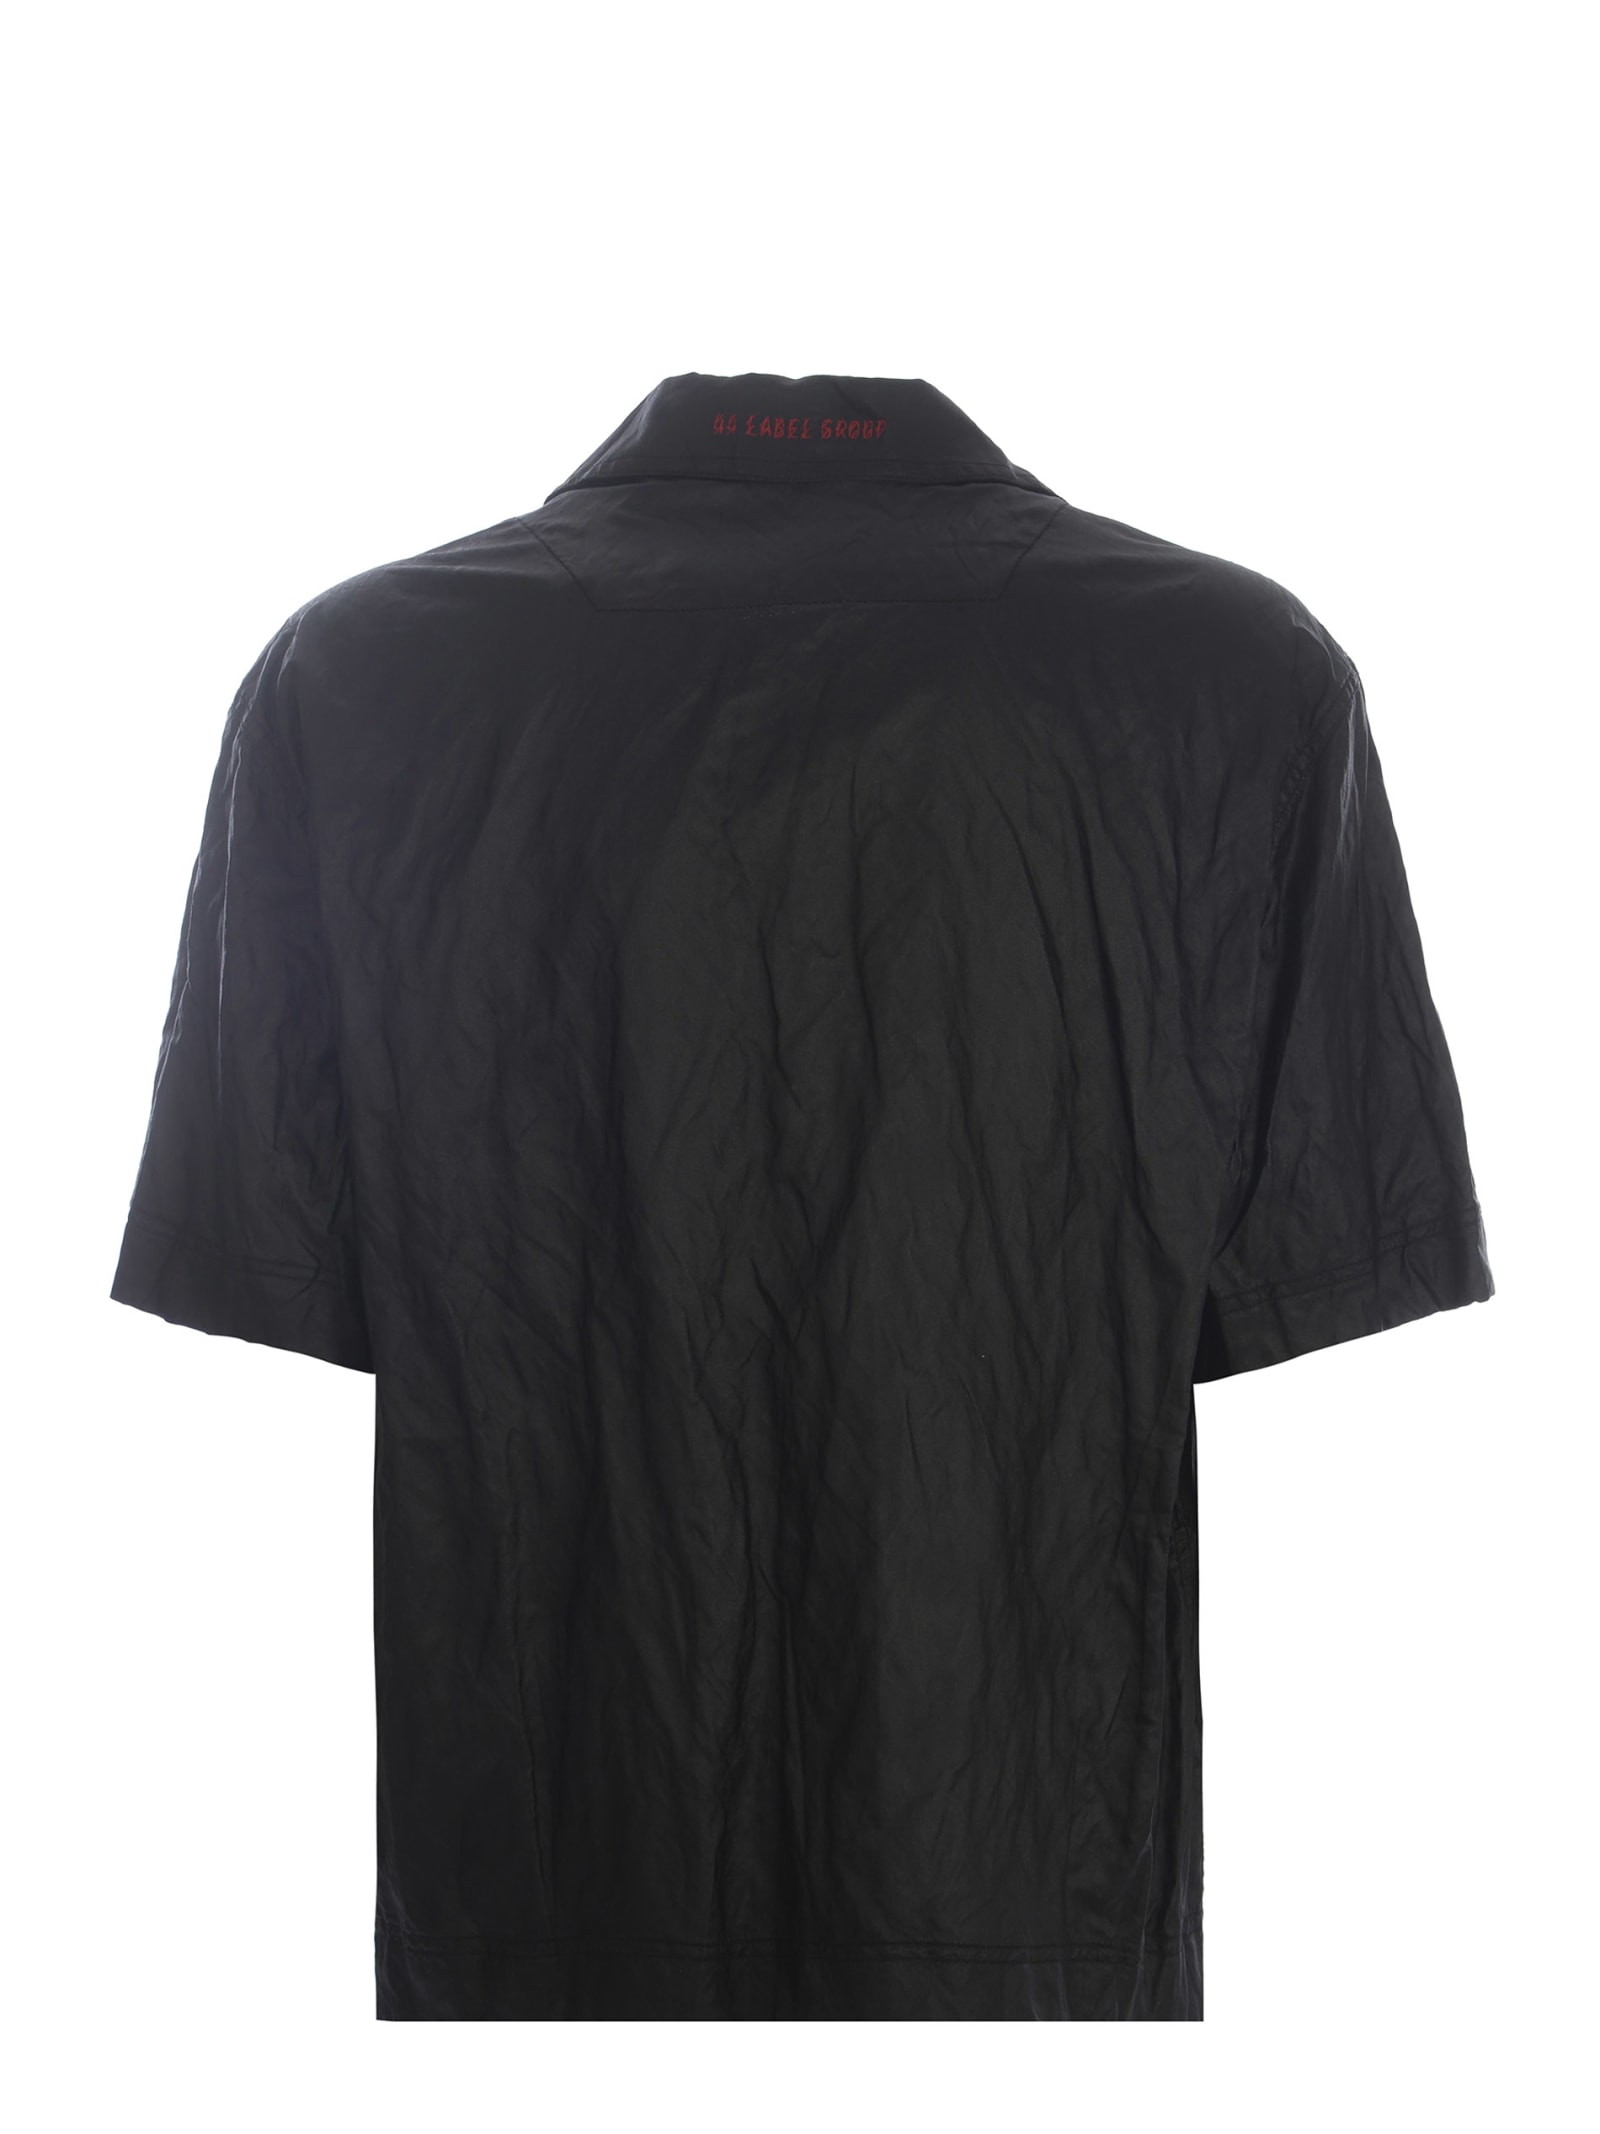 Shop 44 Label Group Bowling Shirt 44label Group Made Of Viscose In Black